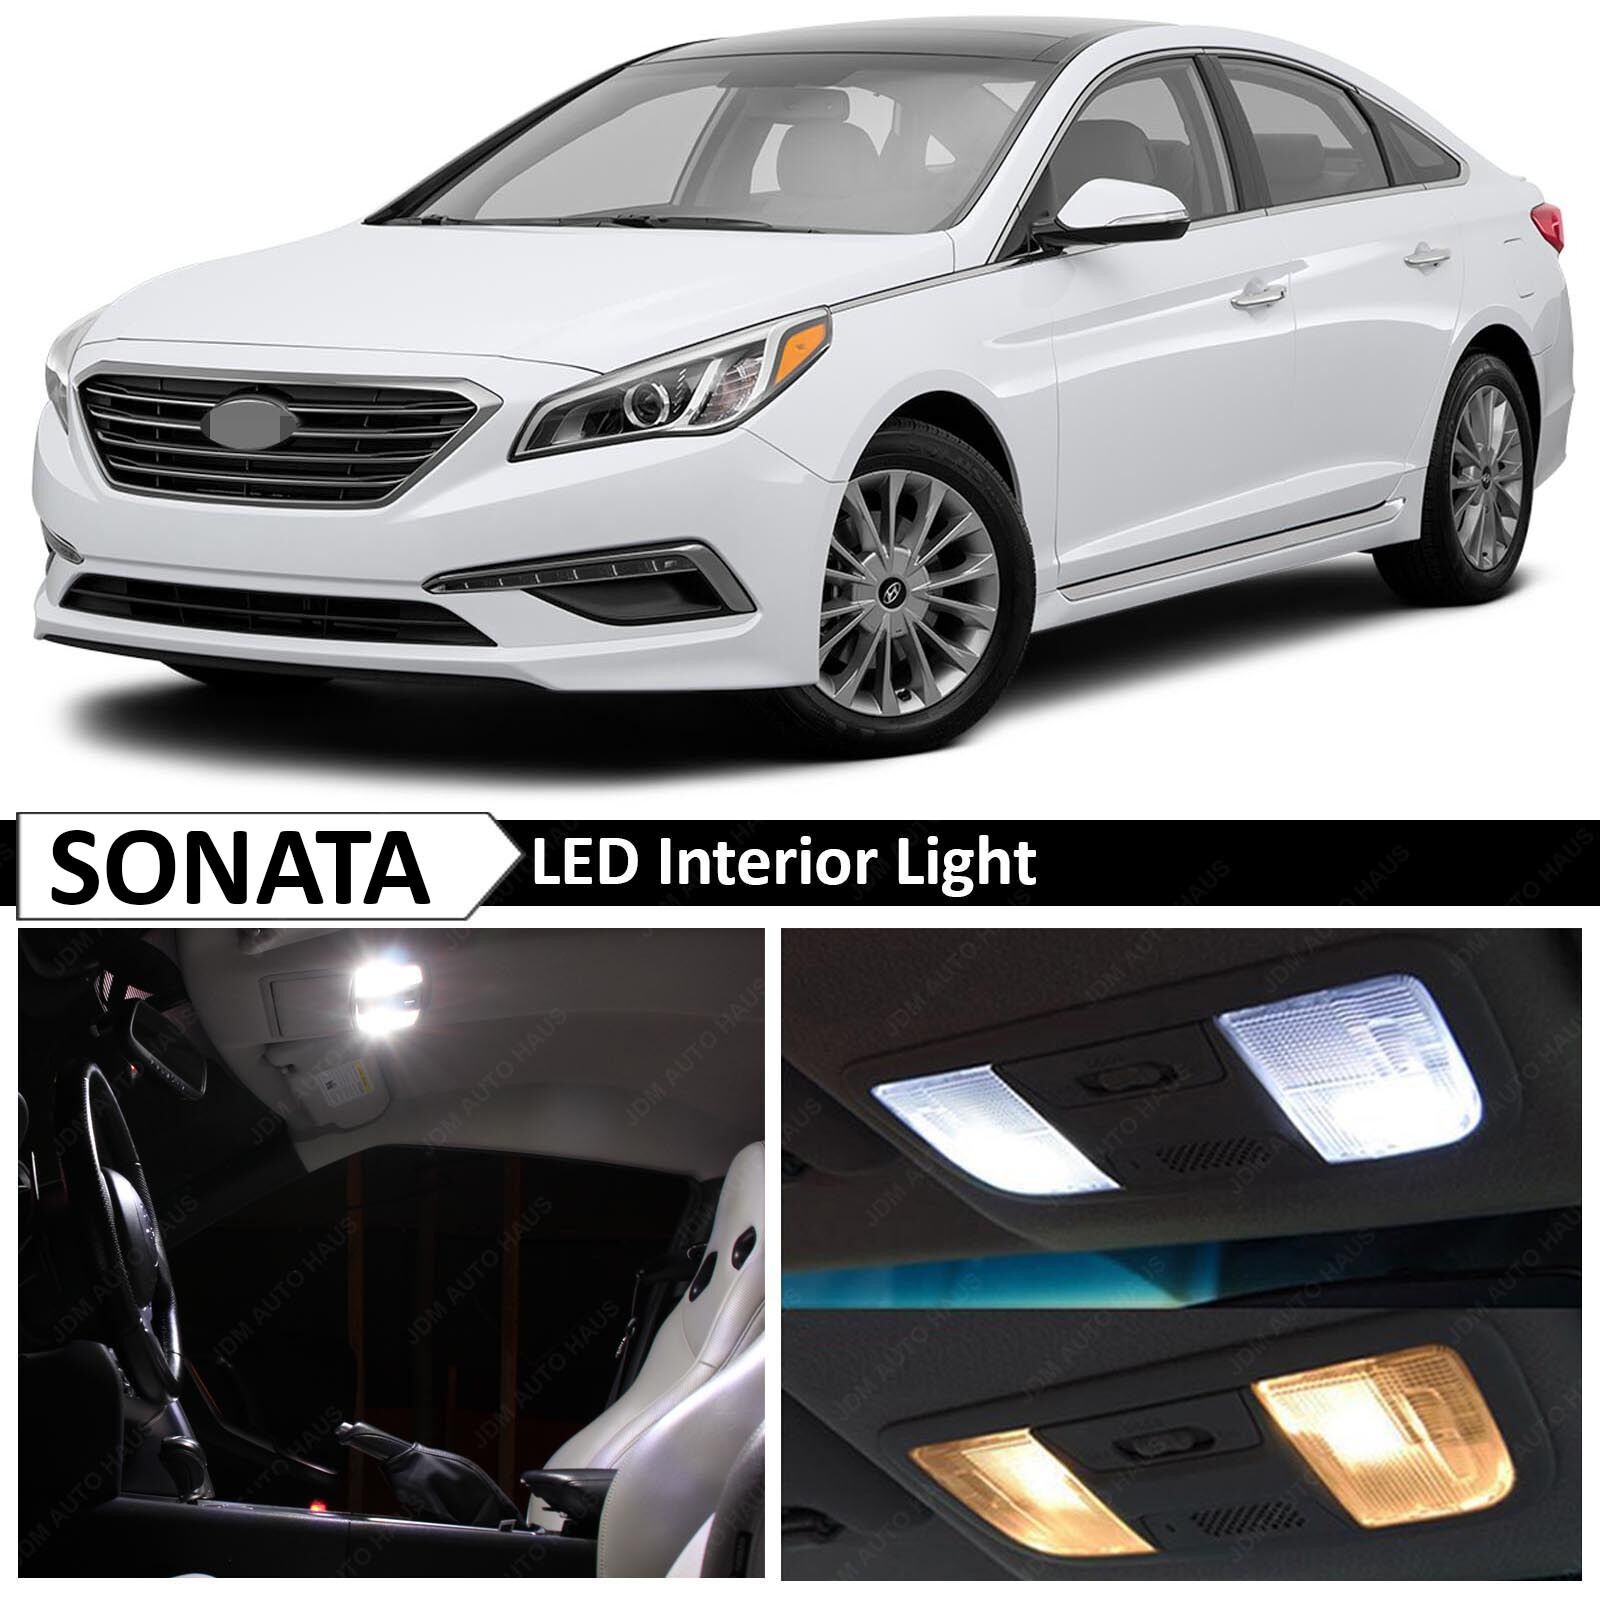 14x White Interior LED Lights Package for 2011-2015 Sonata w/Sunroof + TOOL